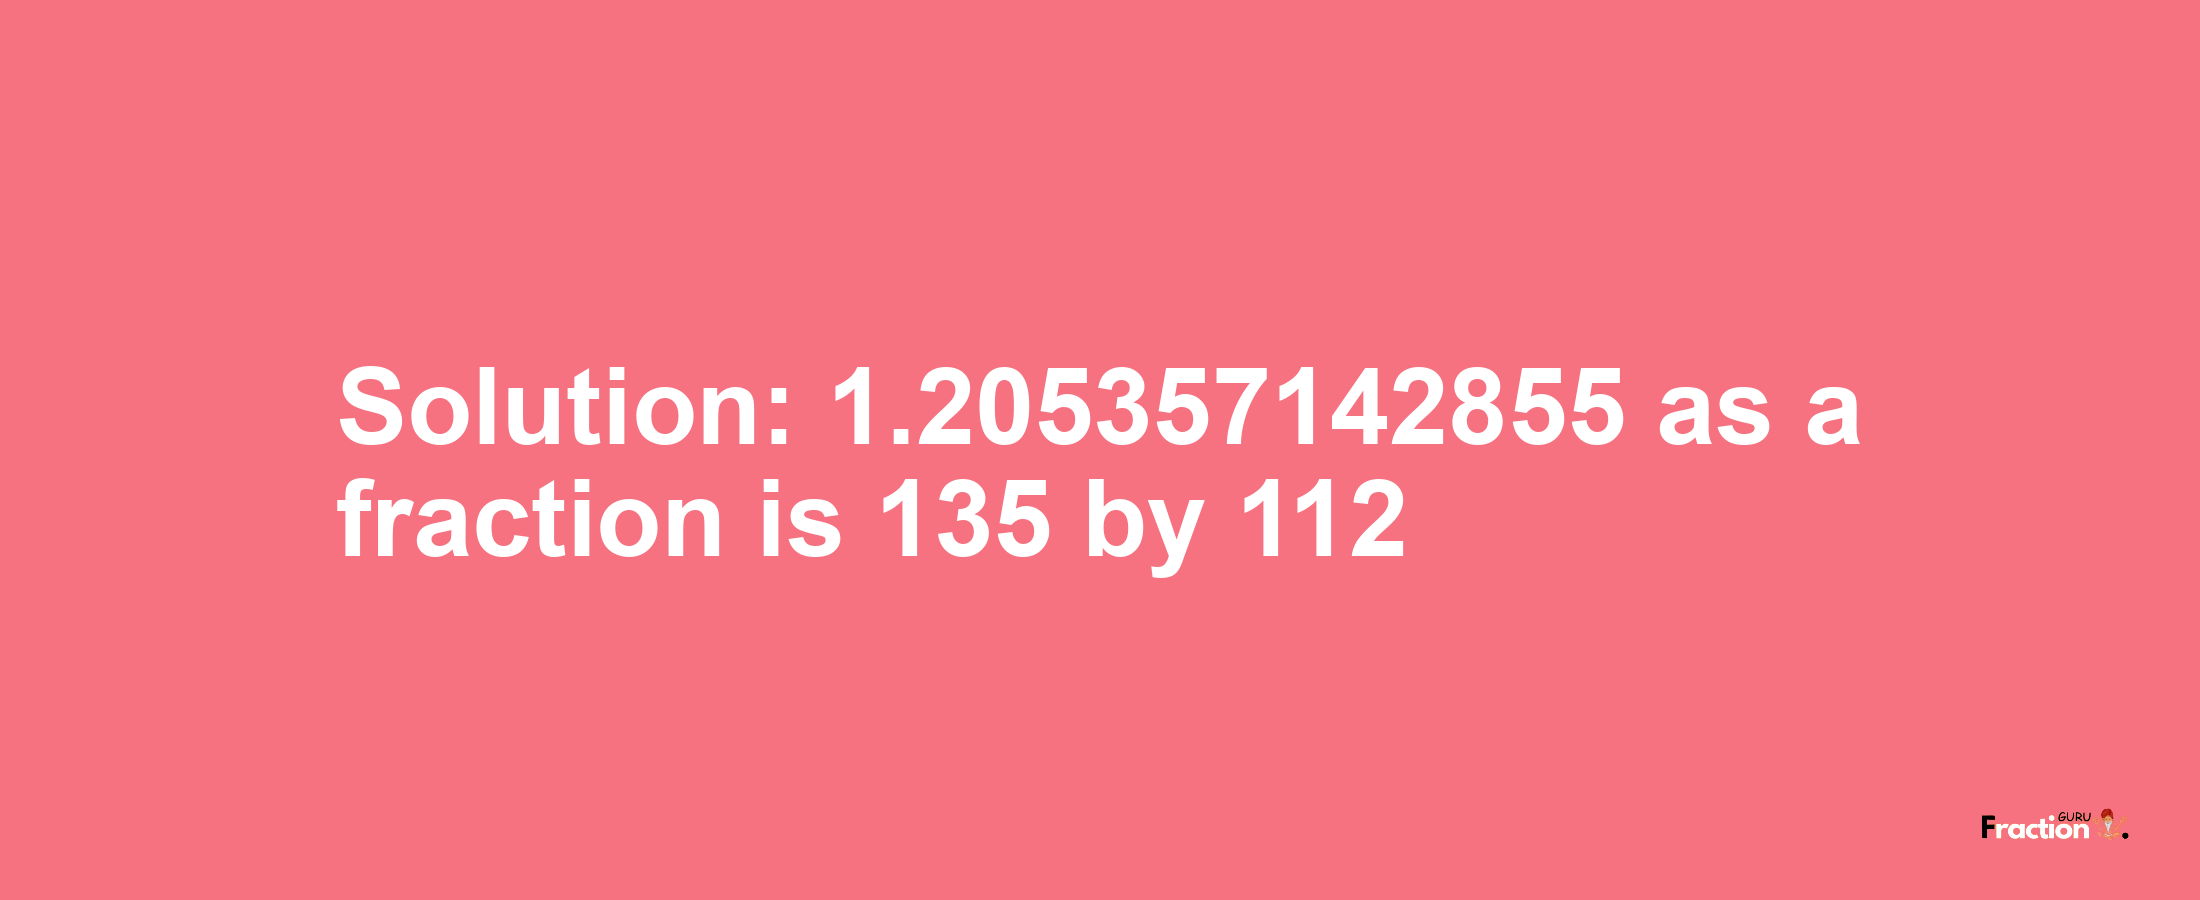 Solution:1.205357142855 as a fraction is 135/112